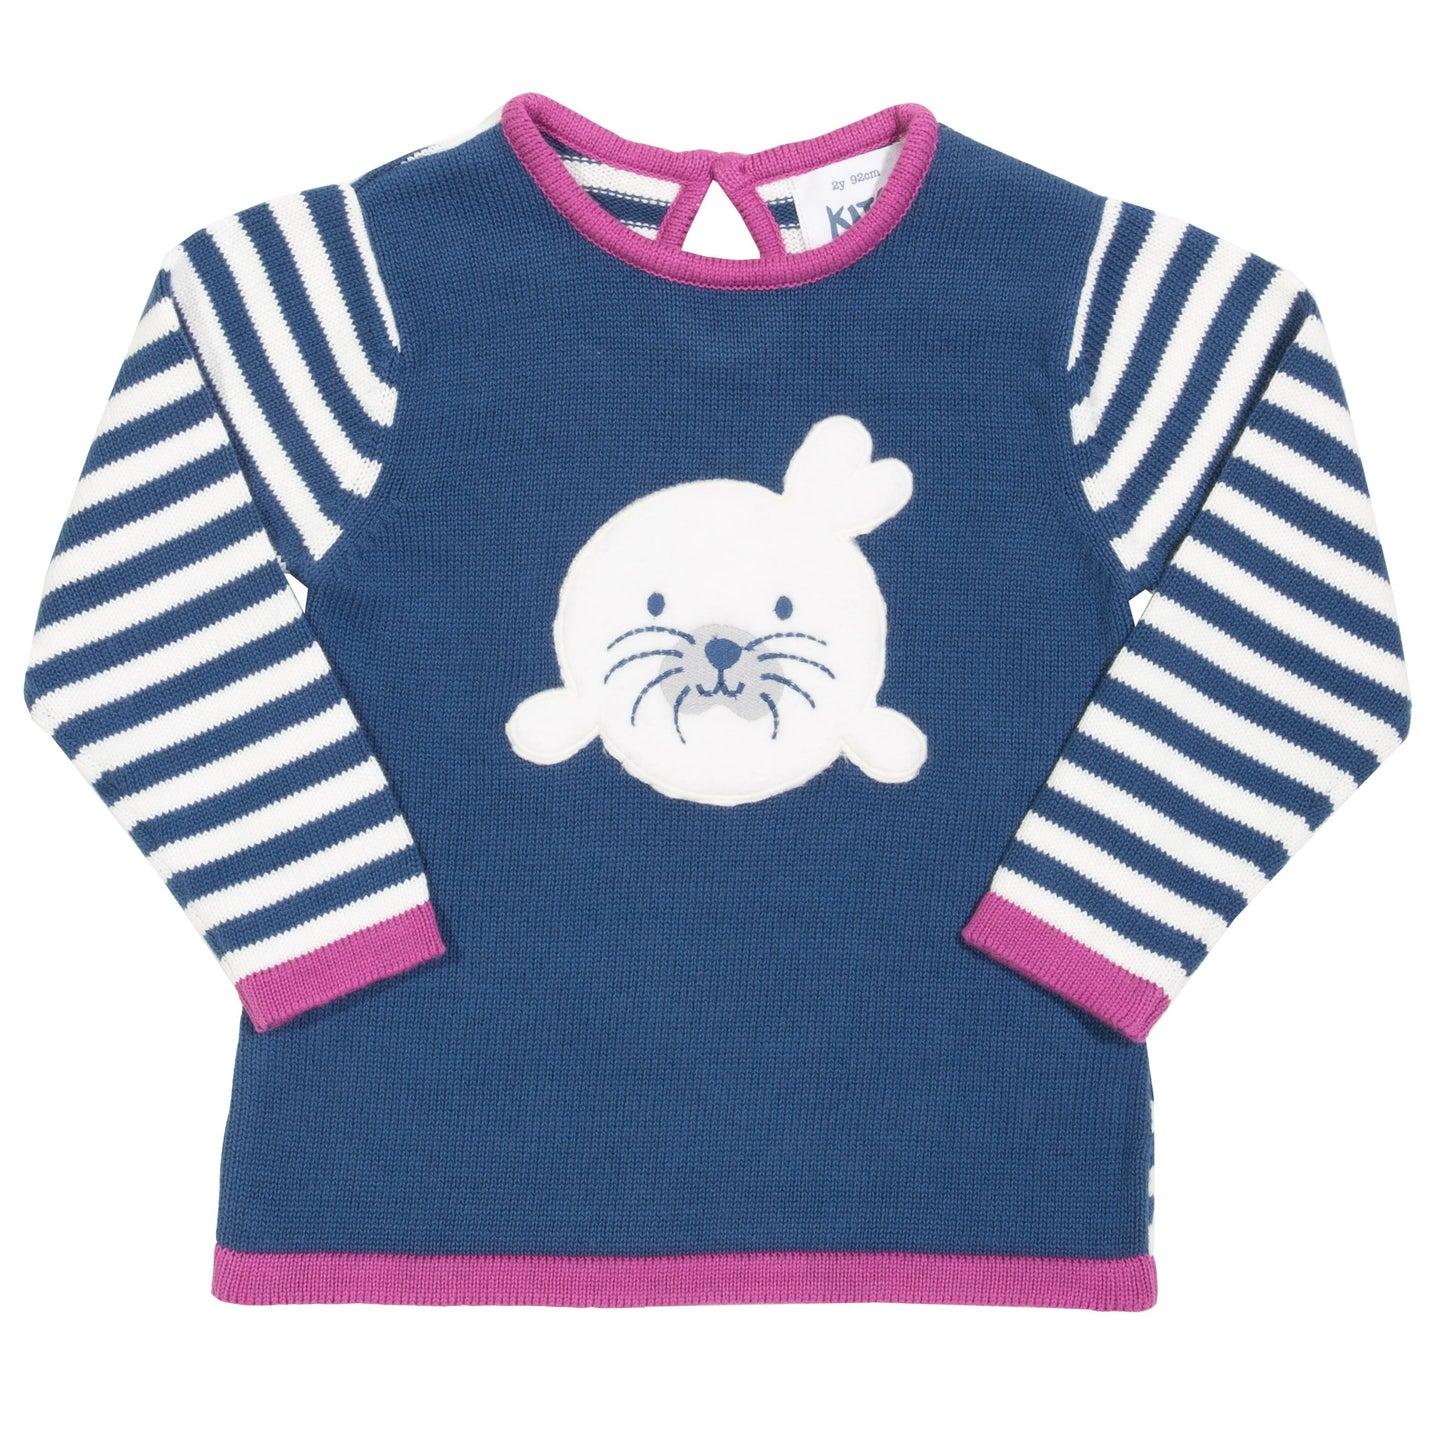 Knitted blue jumper with seal and stripy sleeves